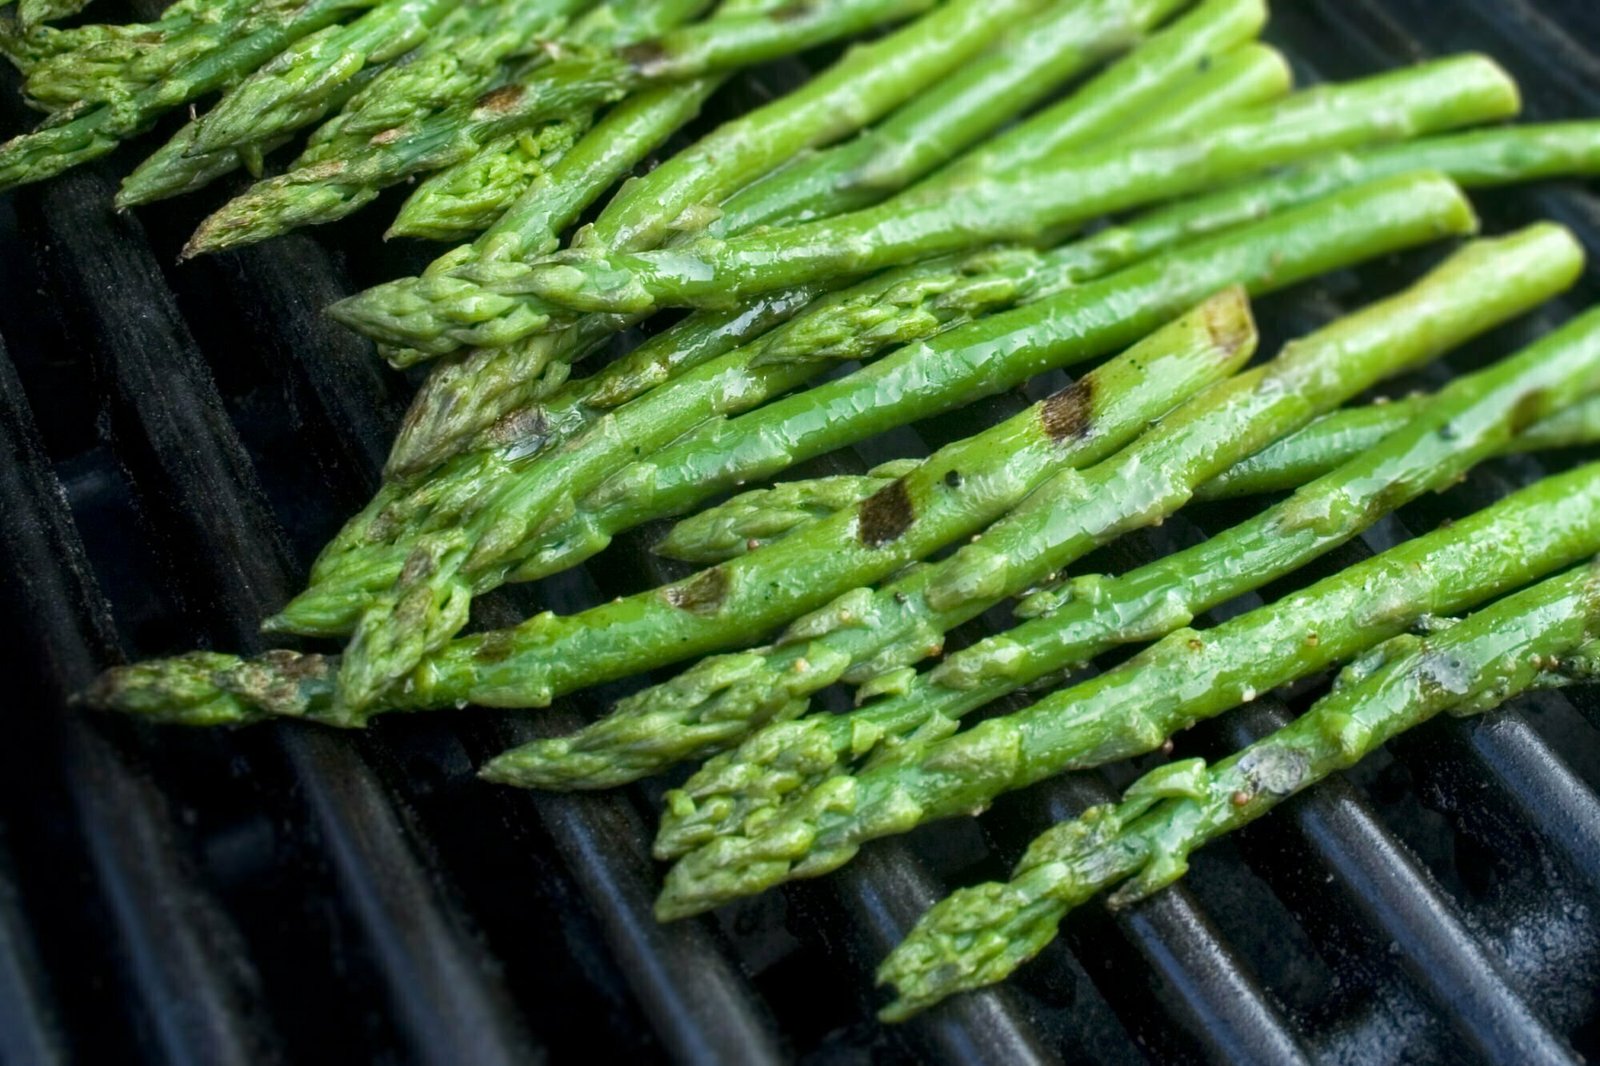 Some stems of green asparagus sits on a bbq grill